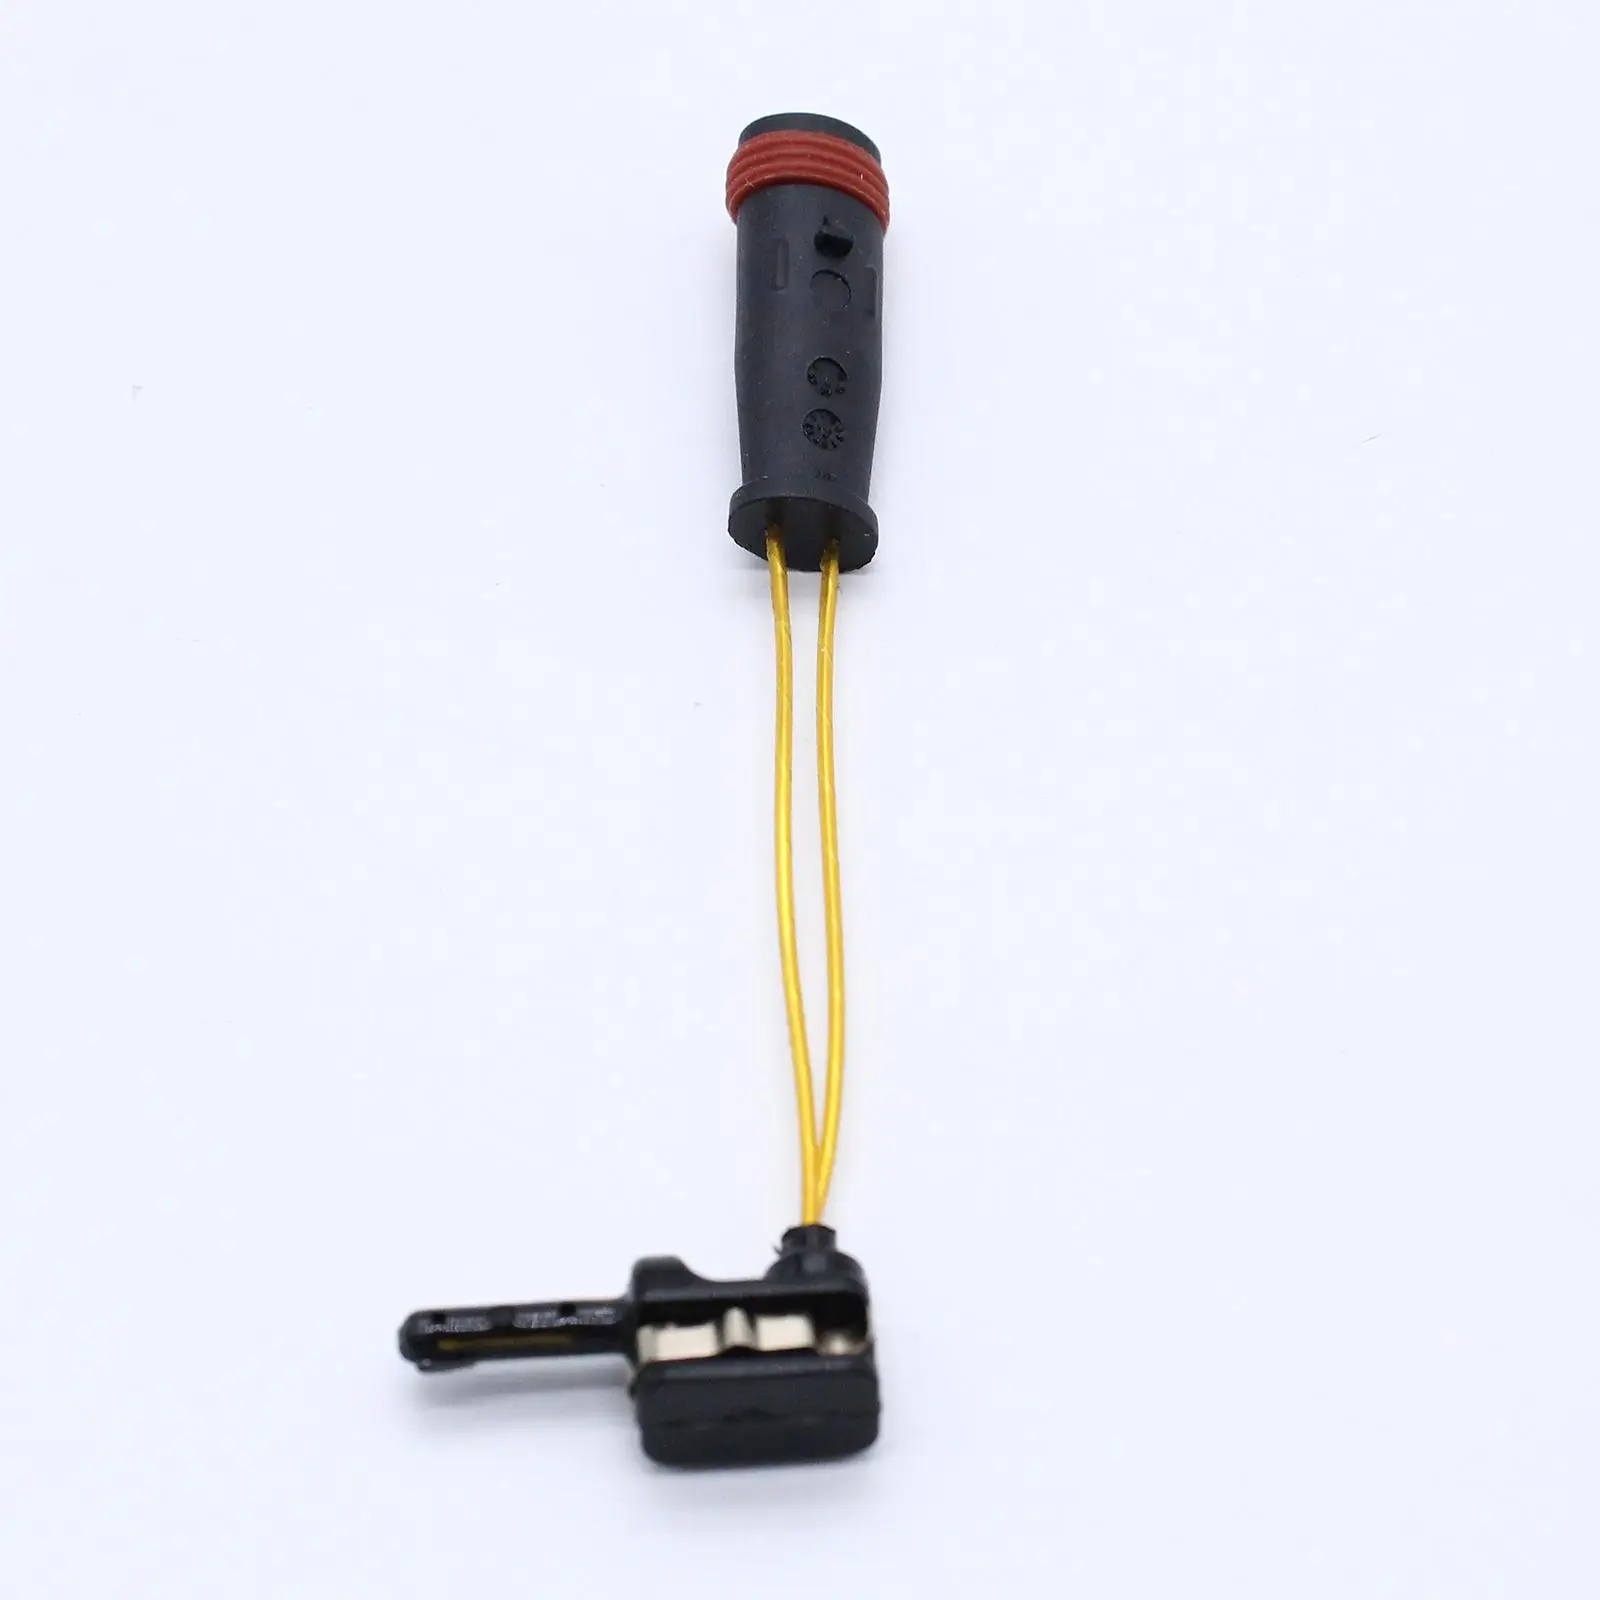 2115401717 Brake Pad Wear Sensor Fit for W203 W204 W211 CLK SL C E S Class Replacement